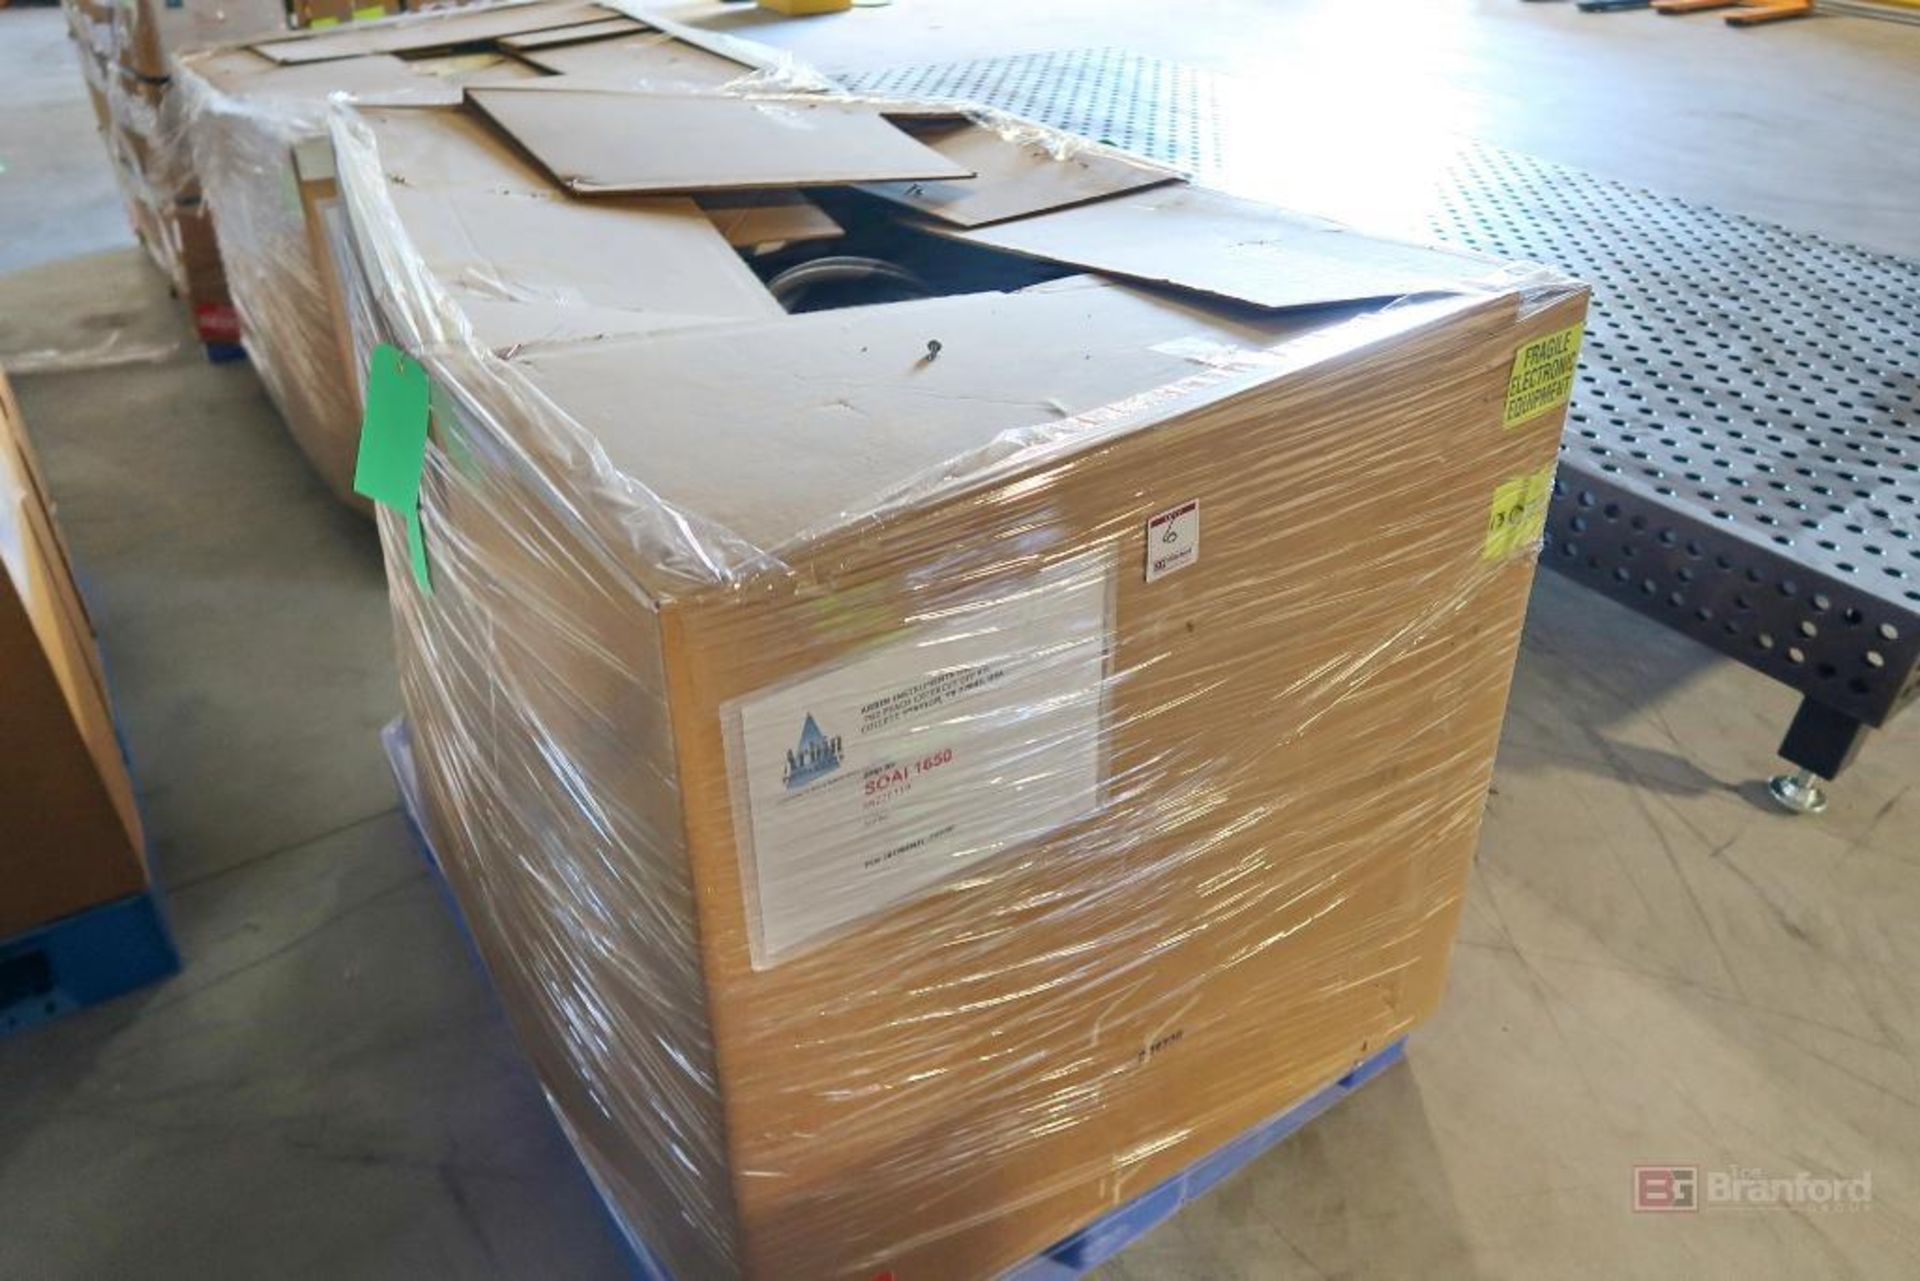 Pallet Crate of Arbin 500-A Copper Cables